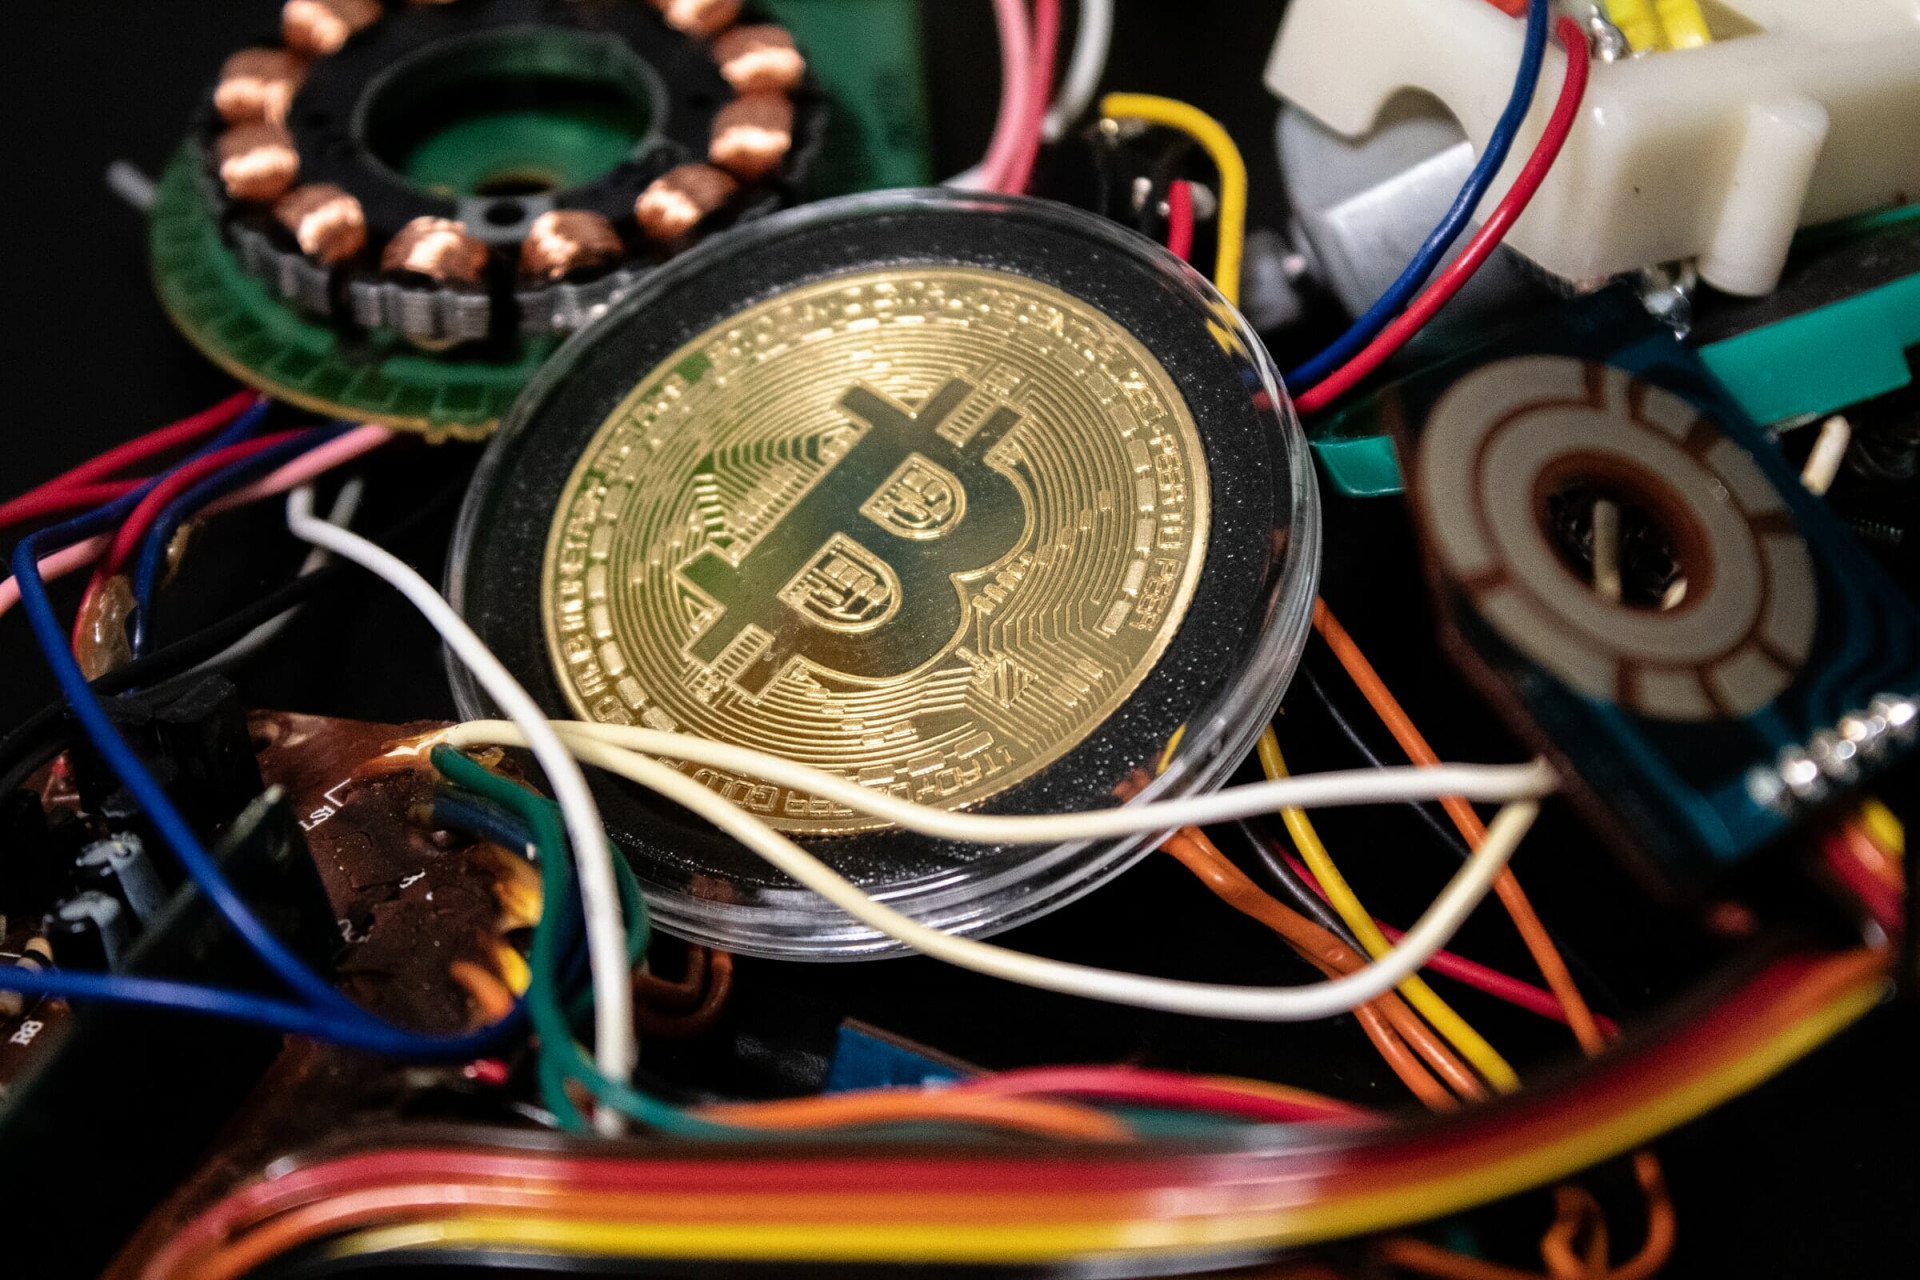 Bitcoin amongst wires used to pay for NFT